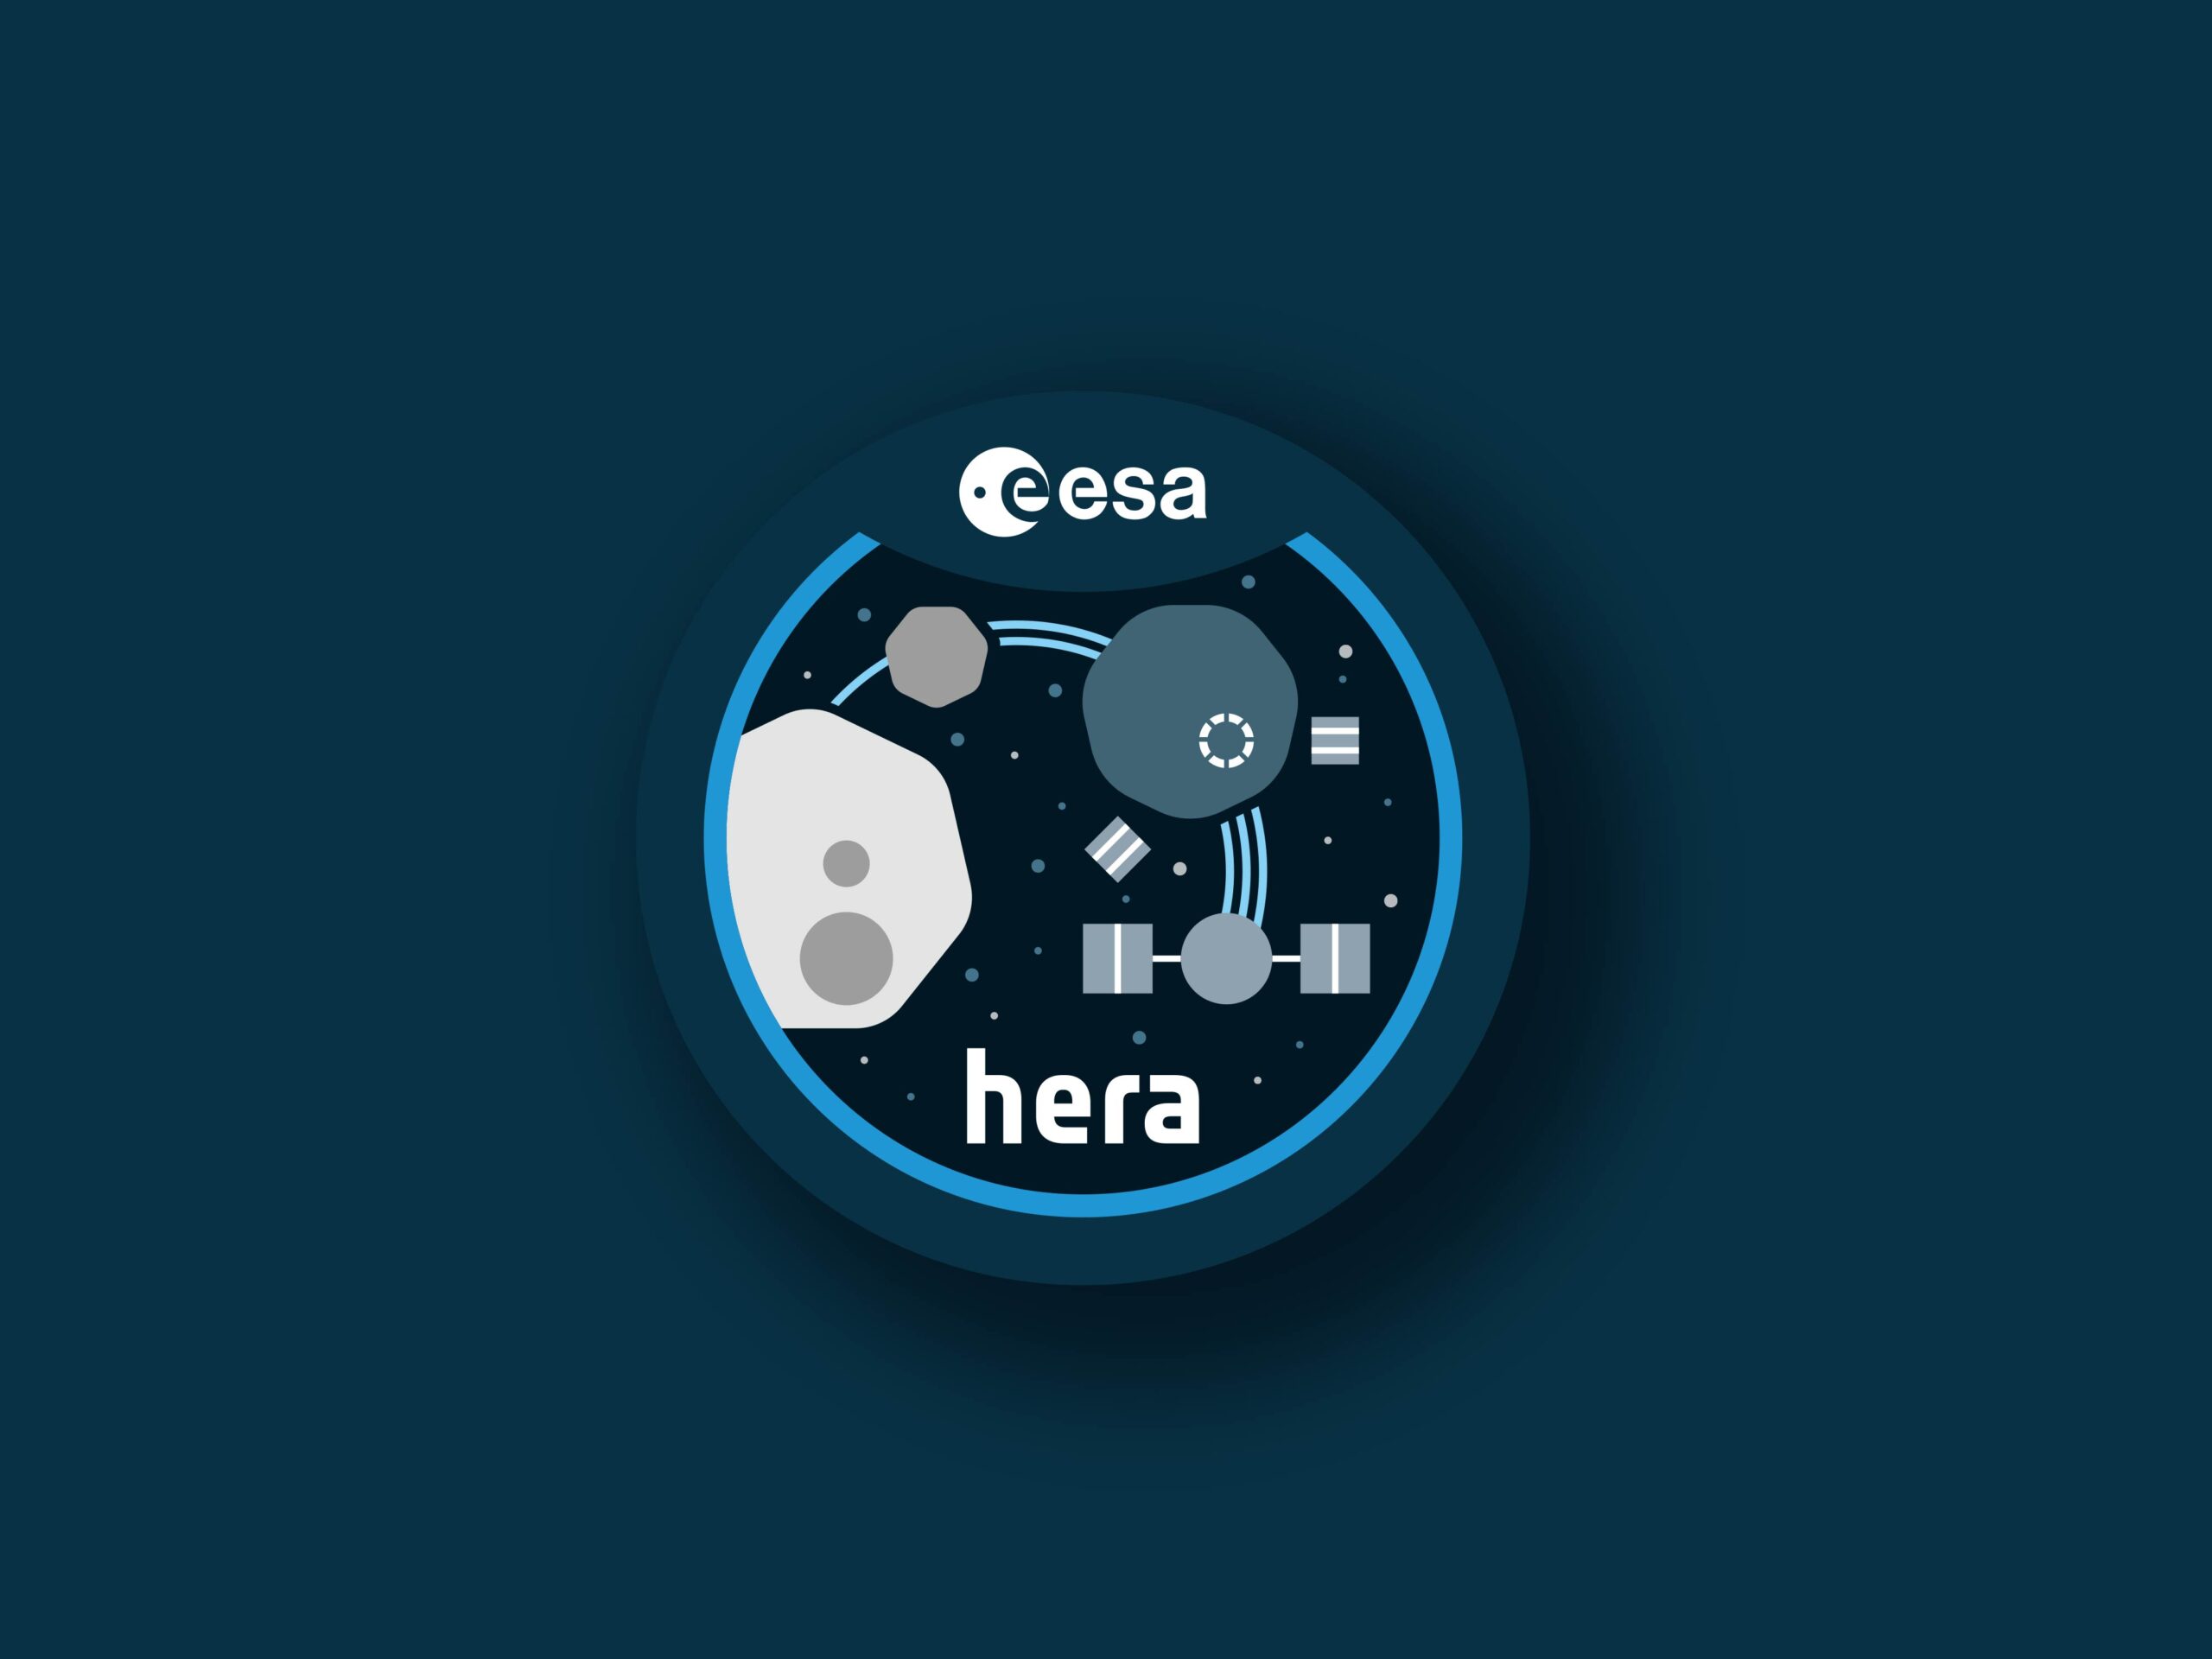 HERA Mission: humankind’s first visit to a binary asteroid system